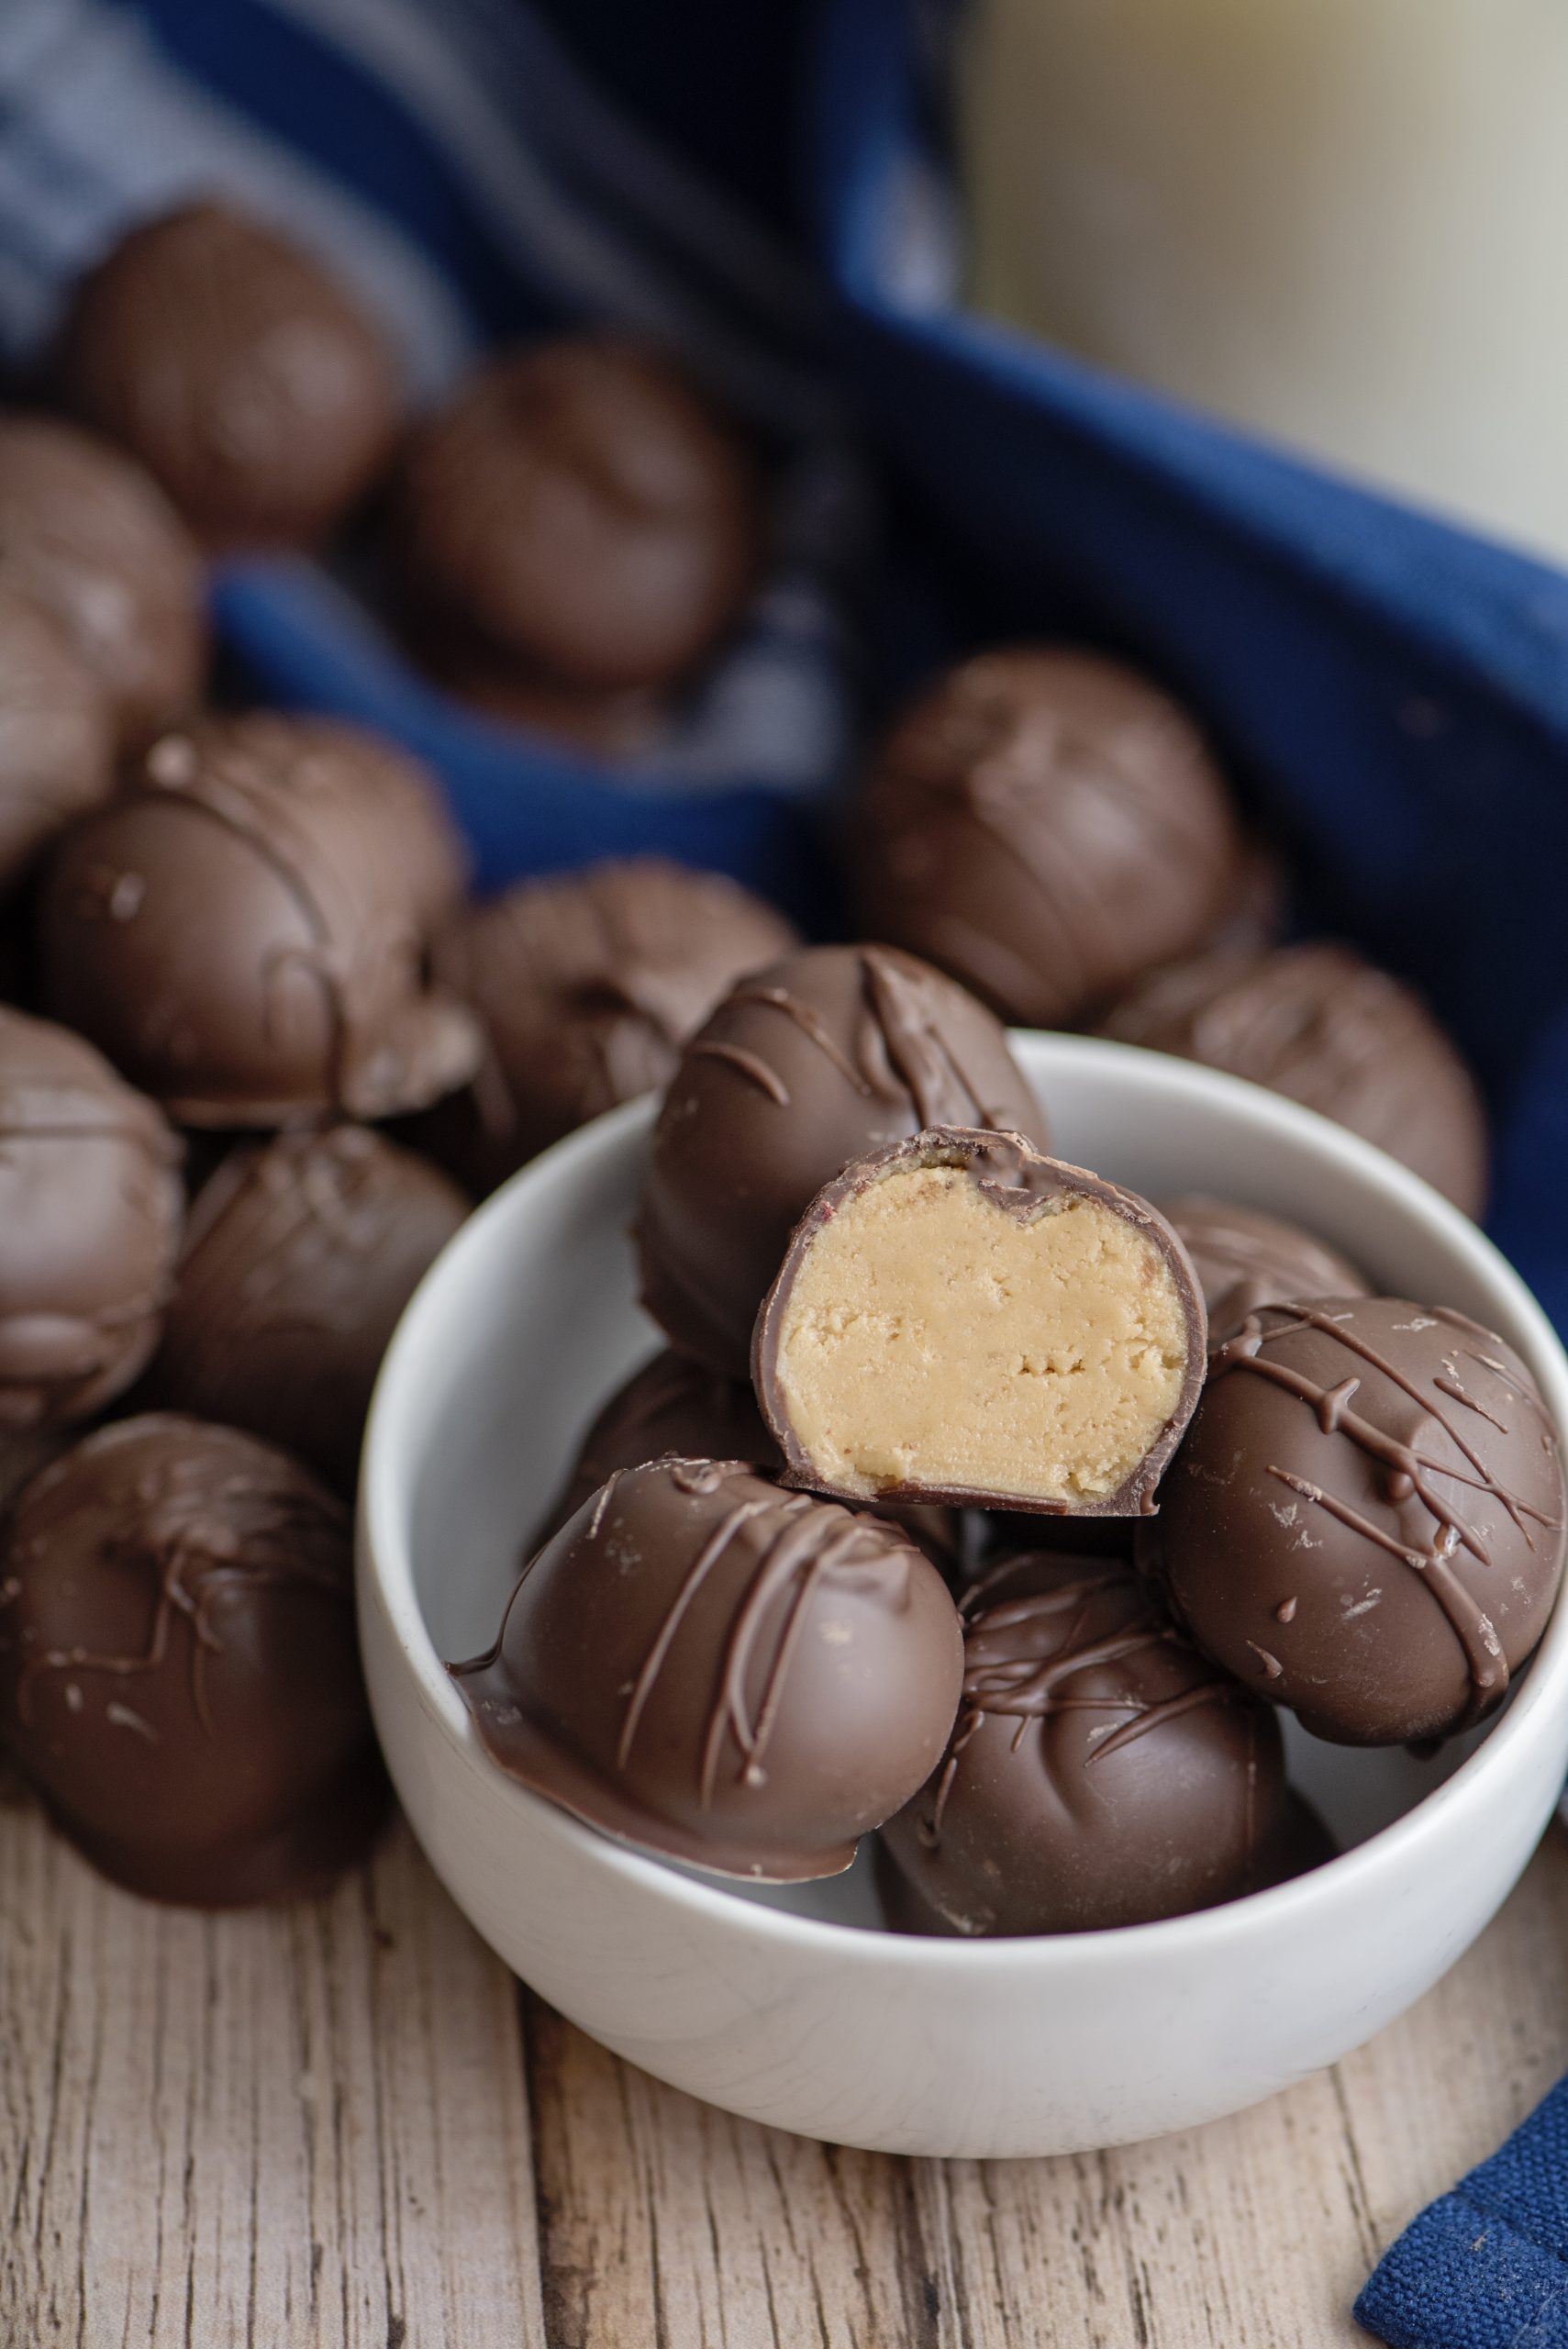 Chocolate Covered Peanut Butter Balls - 4 Sons 'R' Us